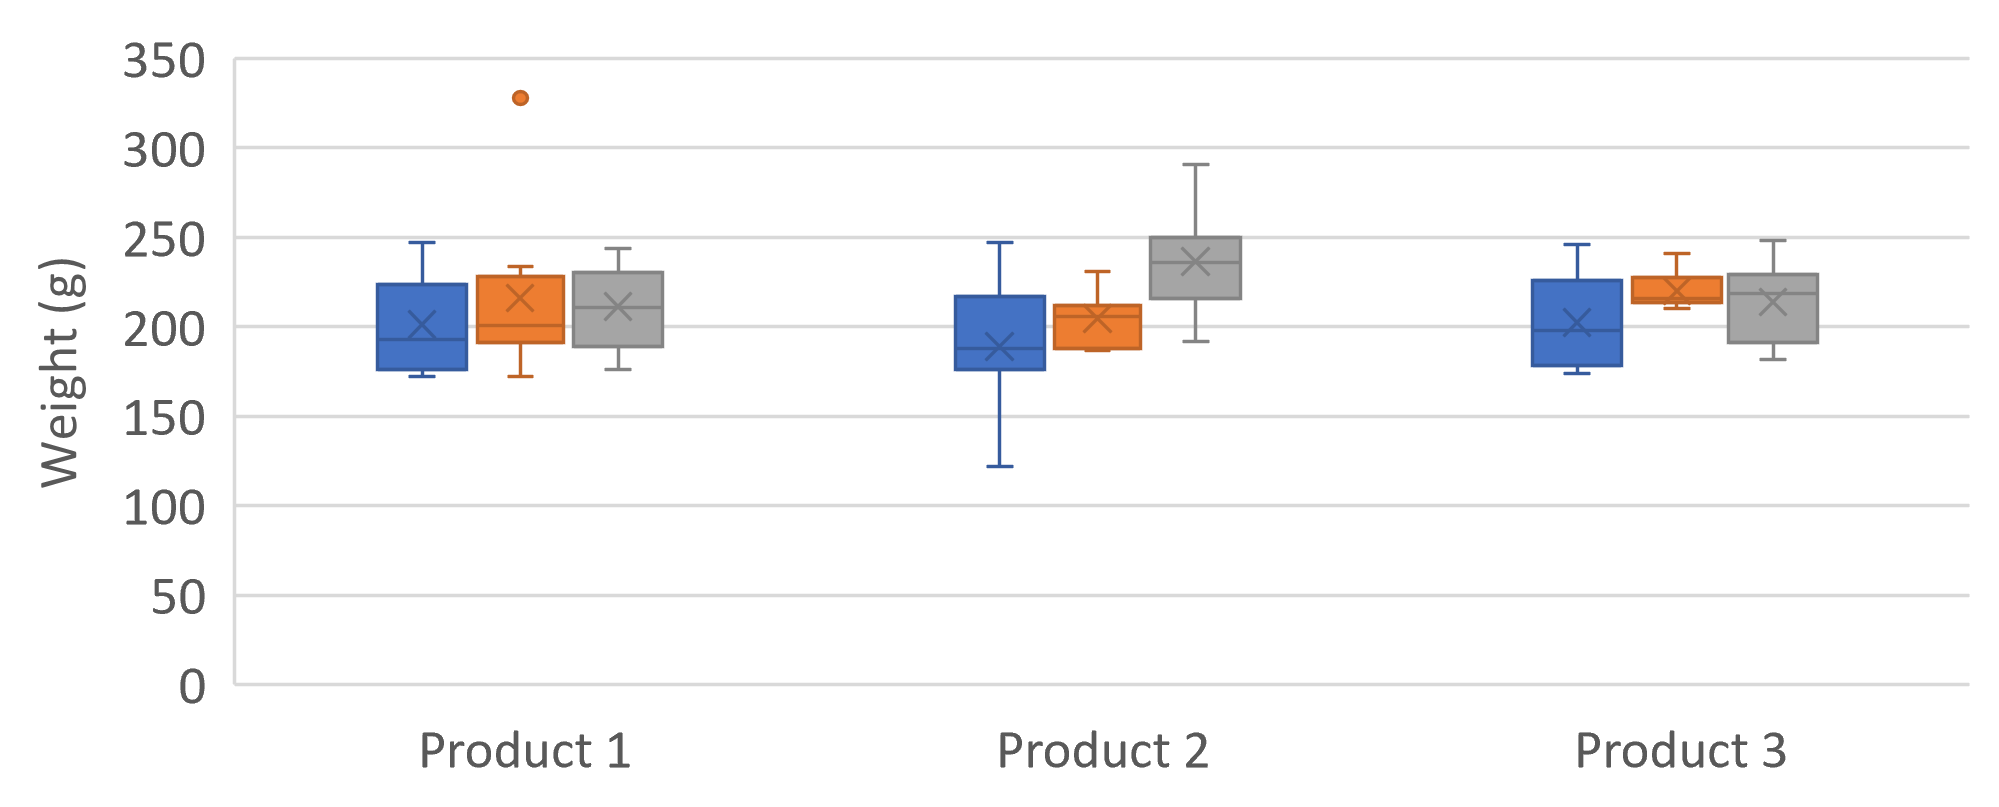 Box plot showing variations in product weights